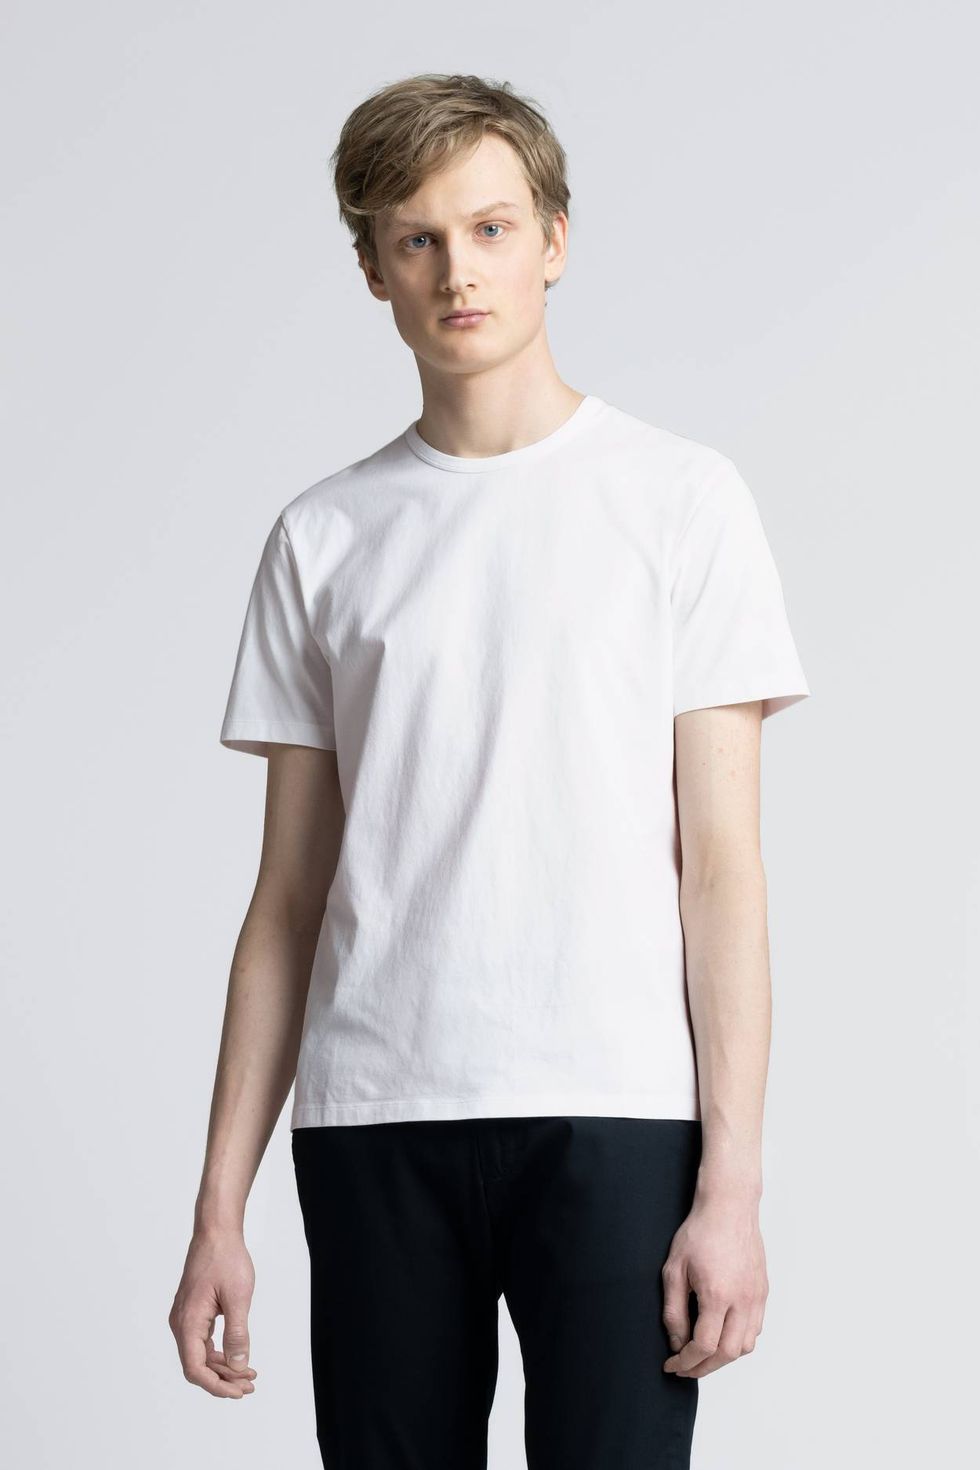 I Spent $500 to Find the Best T-Shirt for Men in 2023 [Cuts, Asket, Uniqlo,  Everlane etc] 